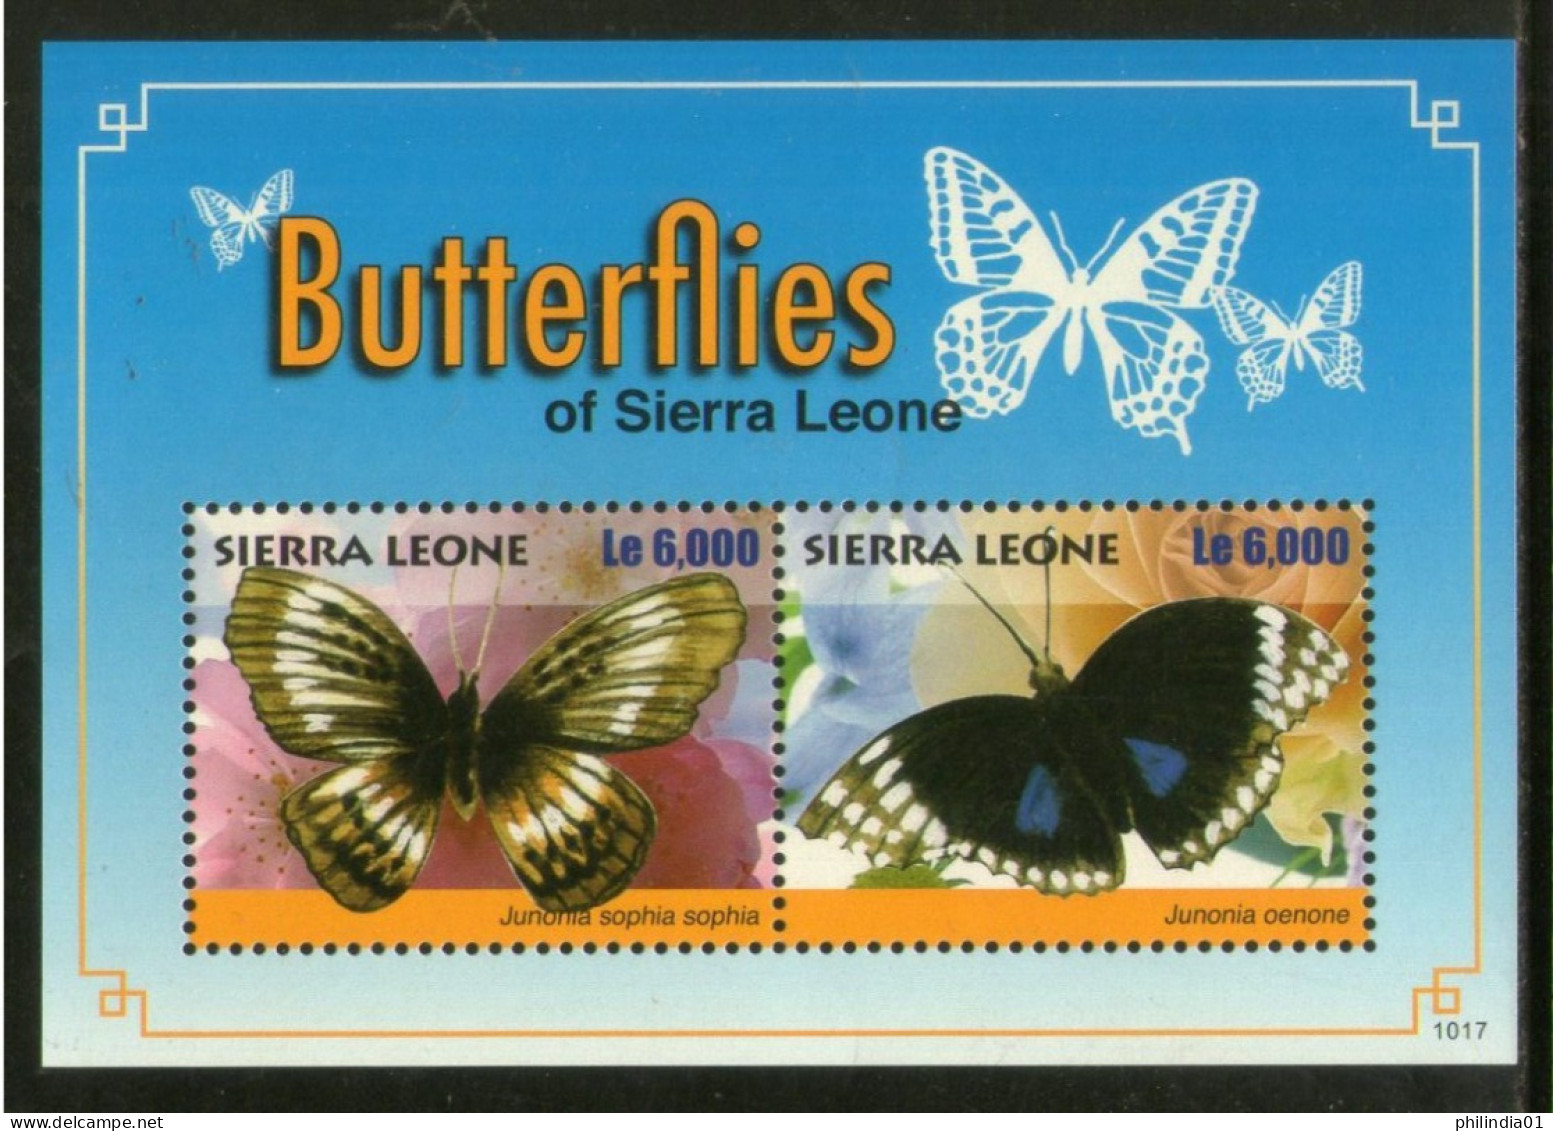 Sierra Leone 2010 Butterflies Moth Insect Sc 3032 M/s MNH # 12655 - Papillons